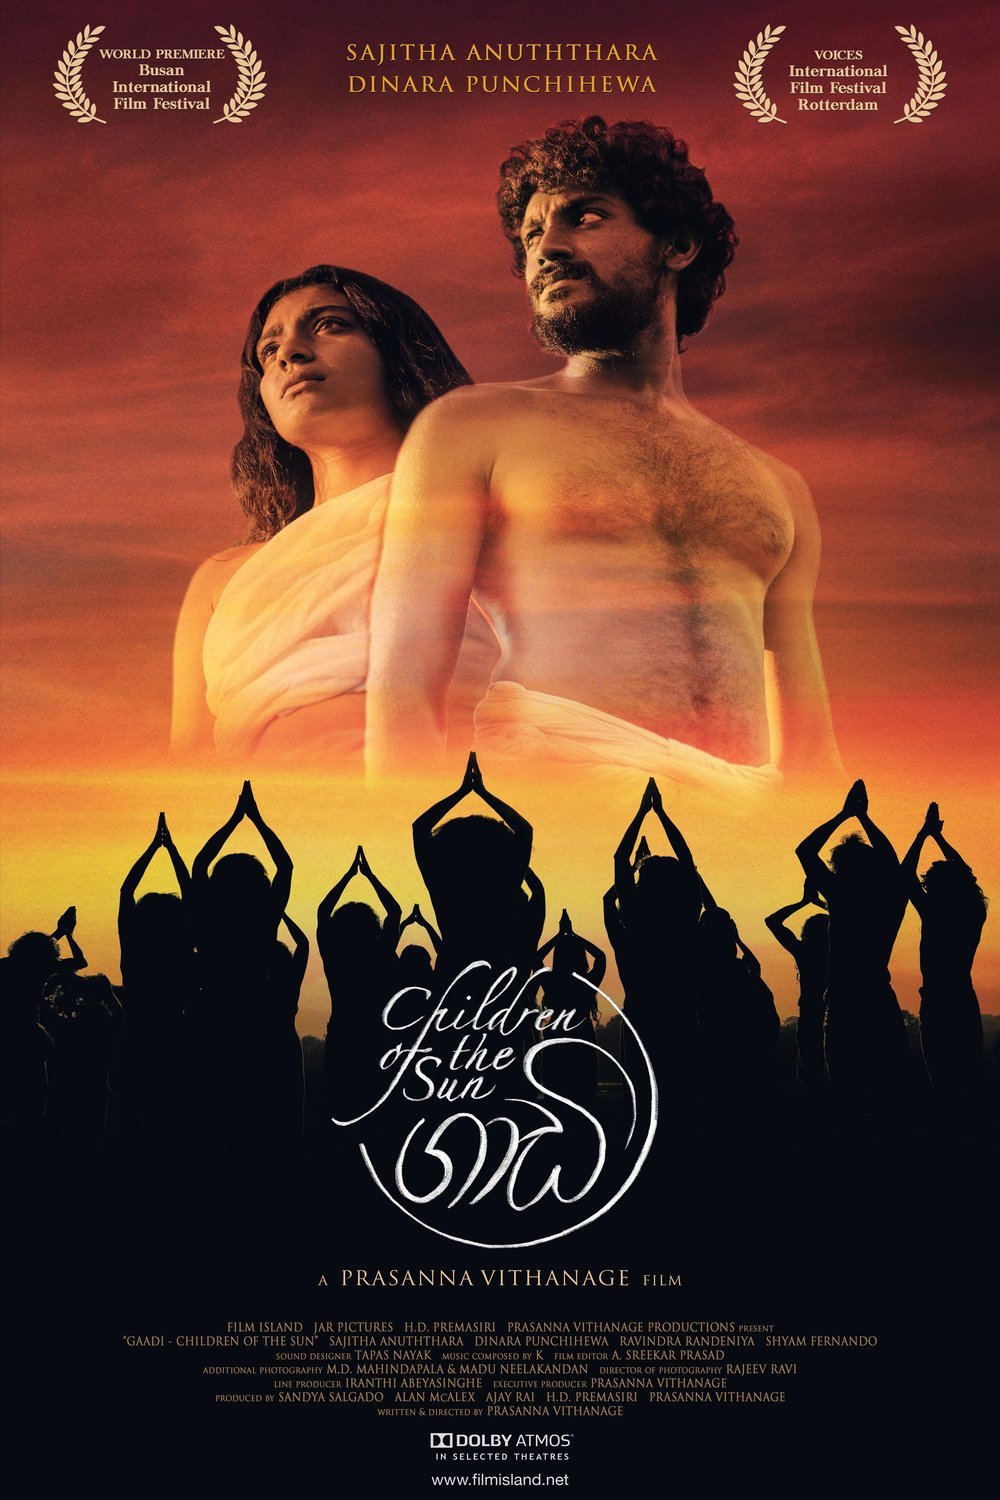 Sinhala poster of the movie Children of the Sun